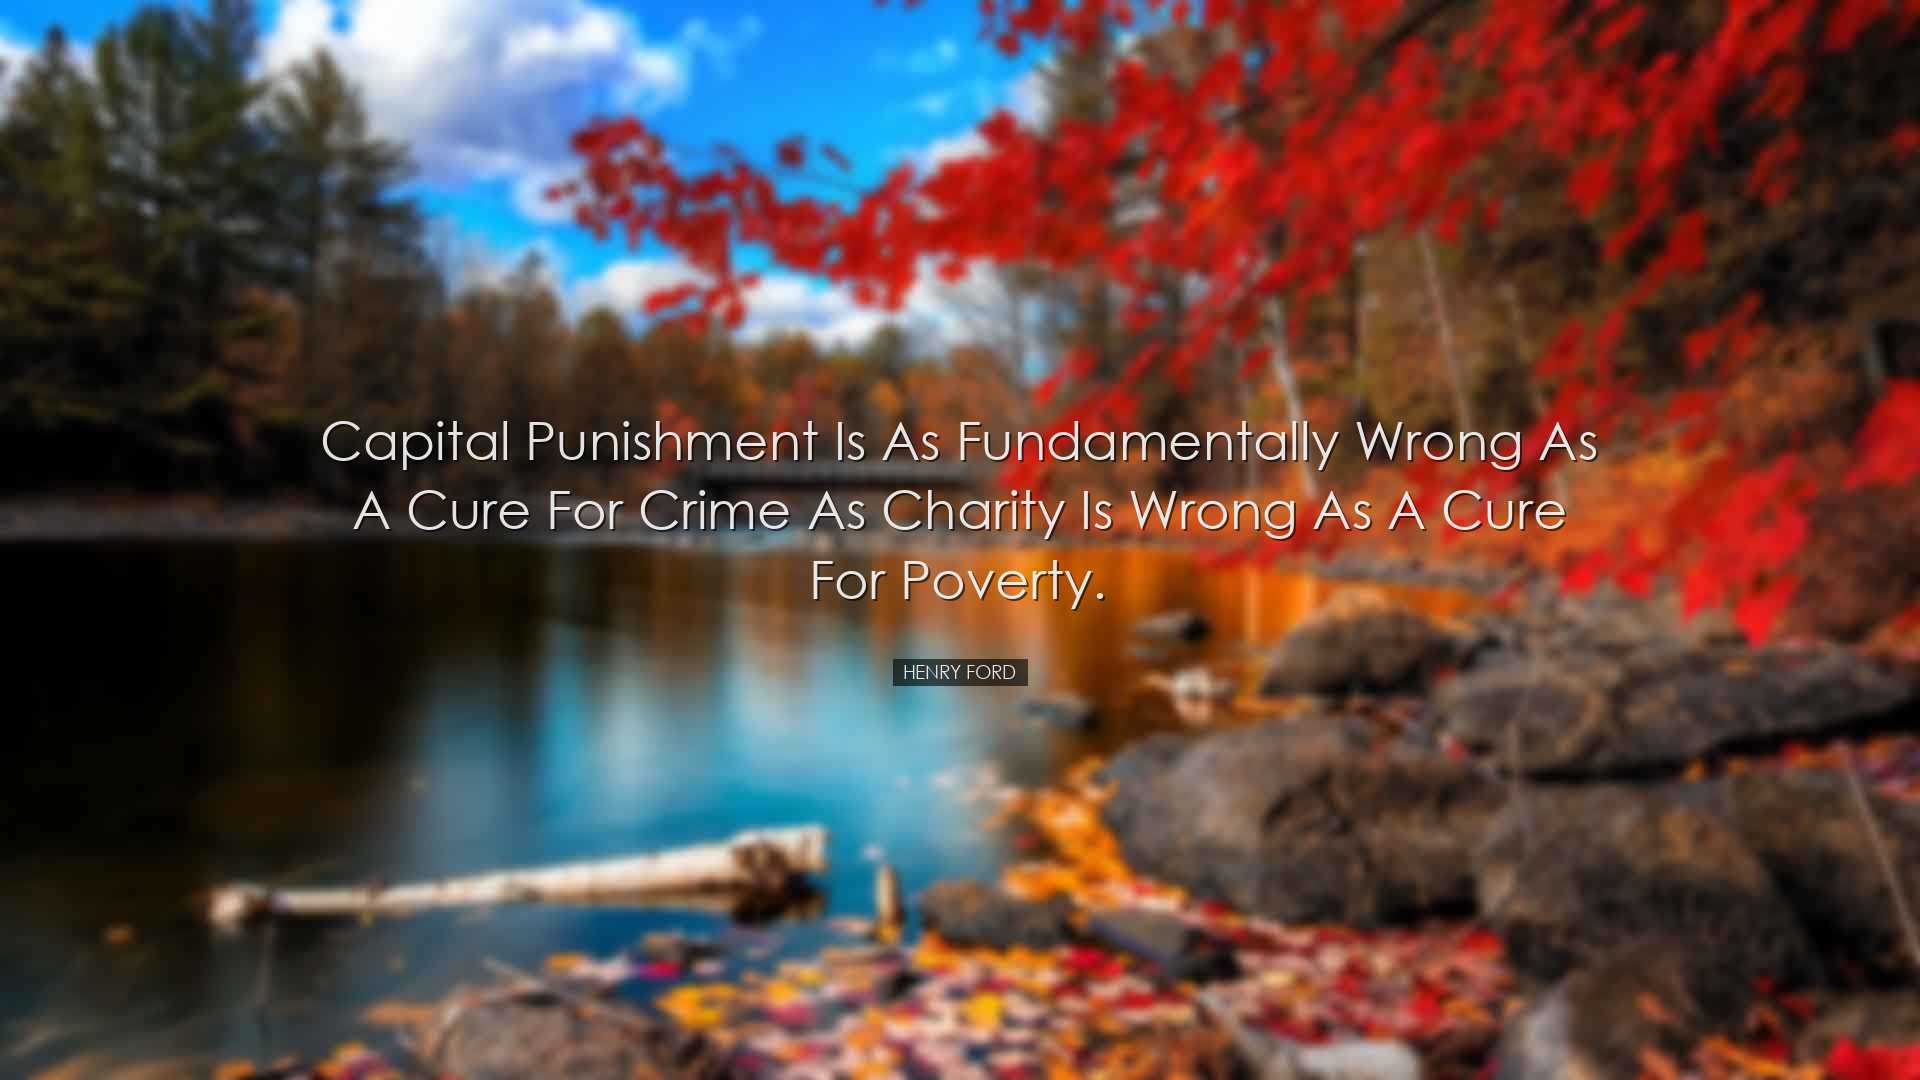 Capital punishment is as fundamentally wrong as a cure for crime a